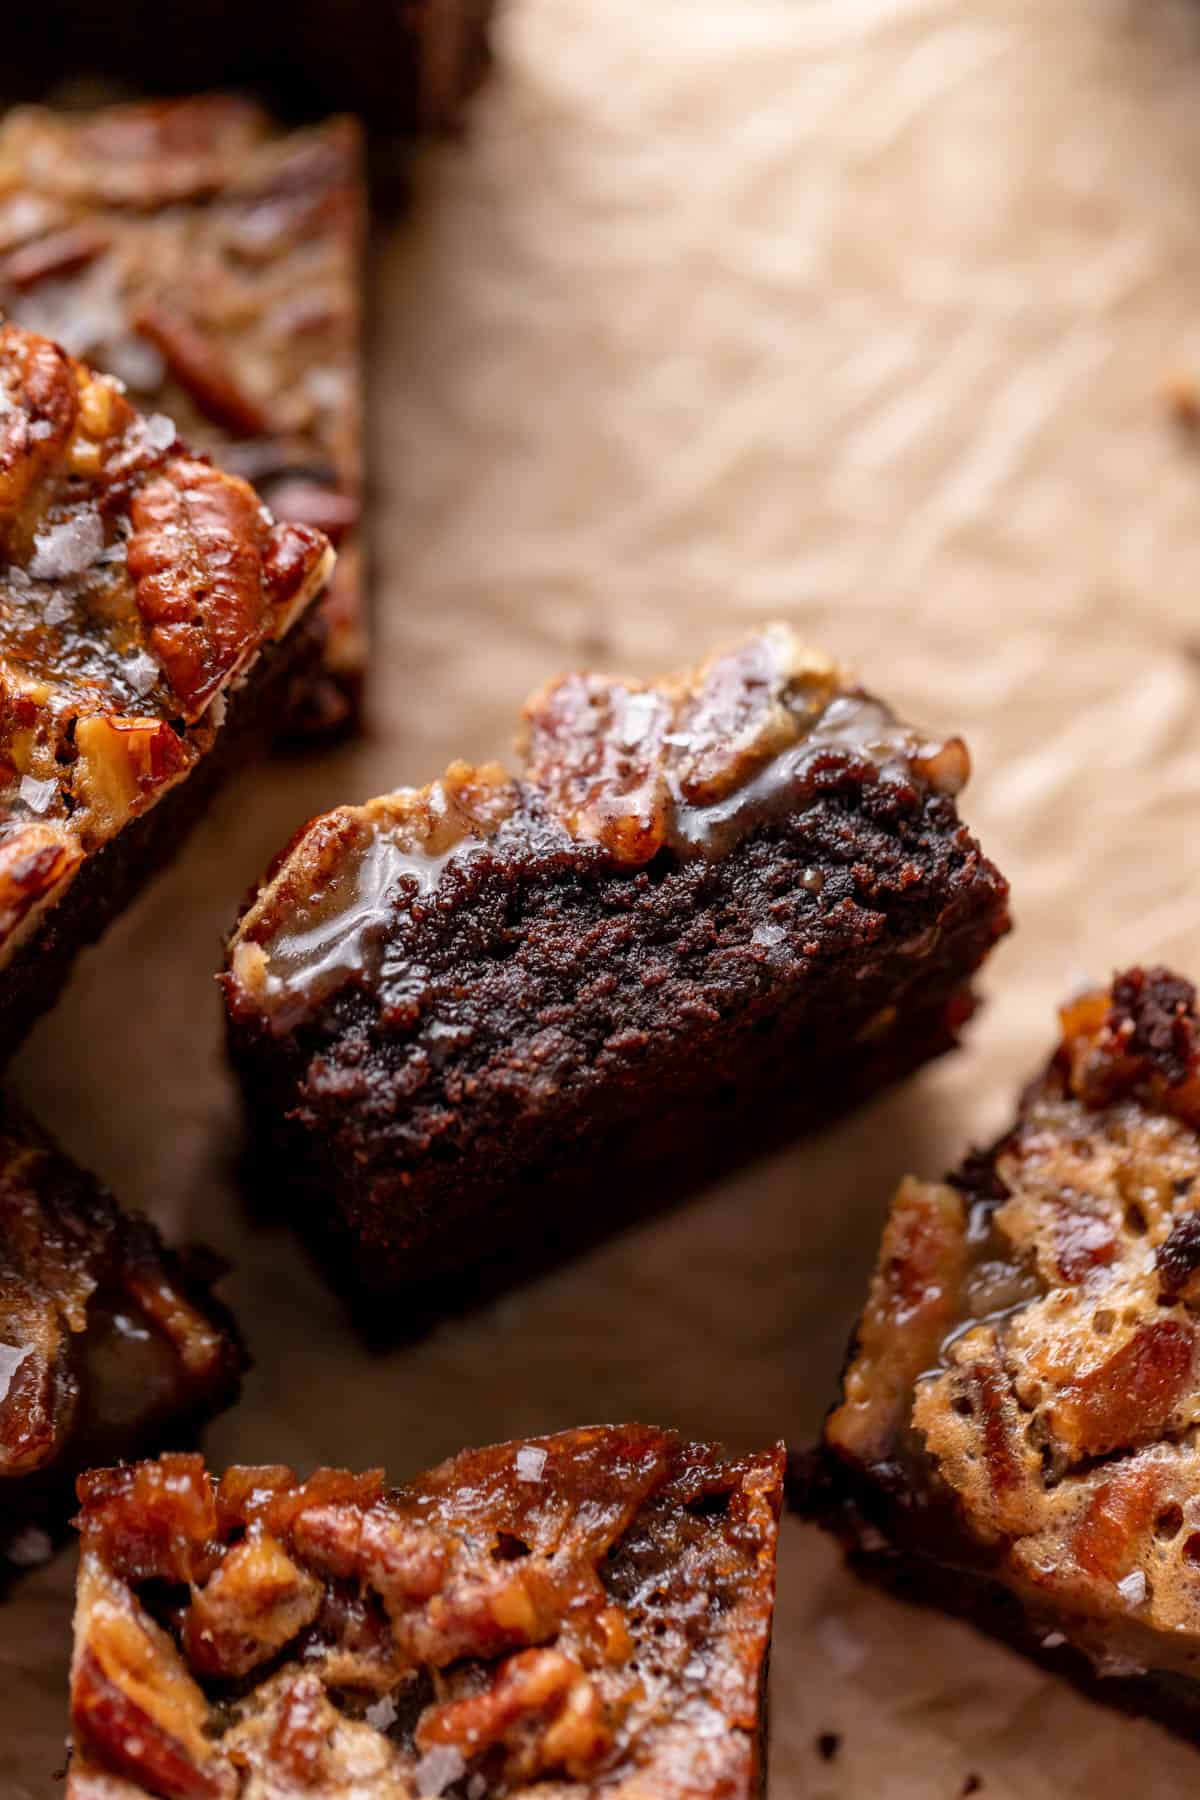 chocolate pecan brownie on its side to show the fudgy texture and gooey pecan pie topping.